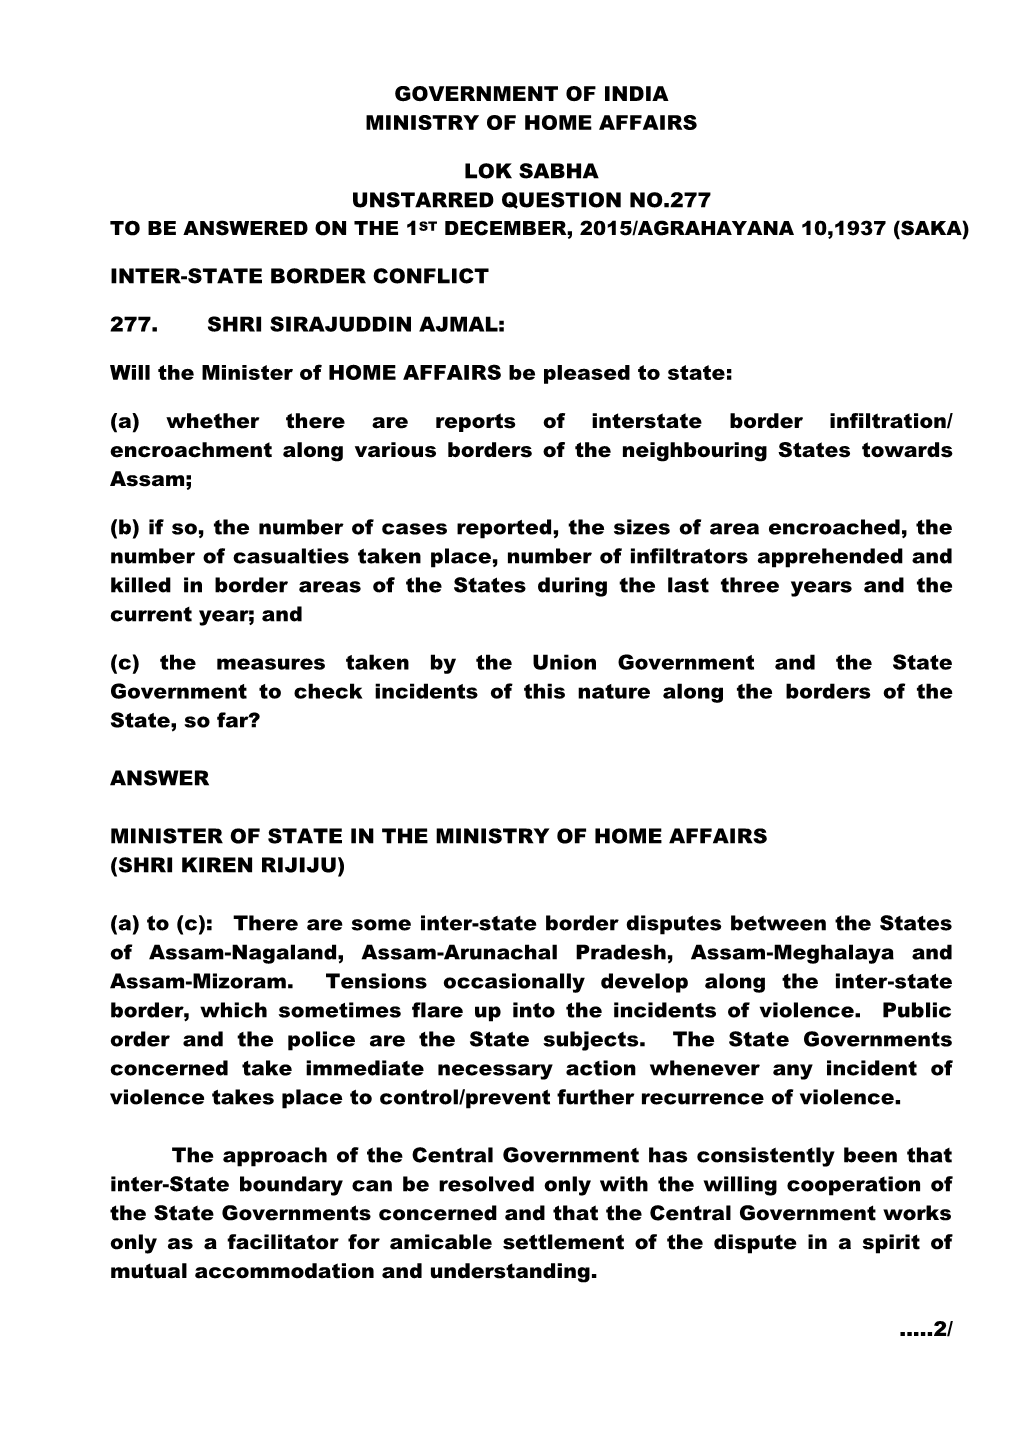 Government of India Ministry of Home Affairs Lok Sabha Unstarred Question